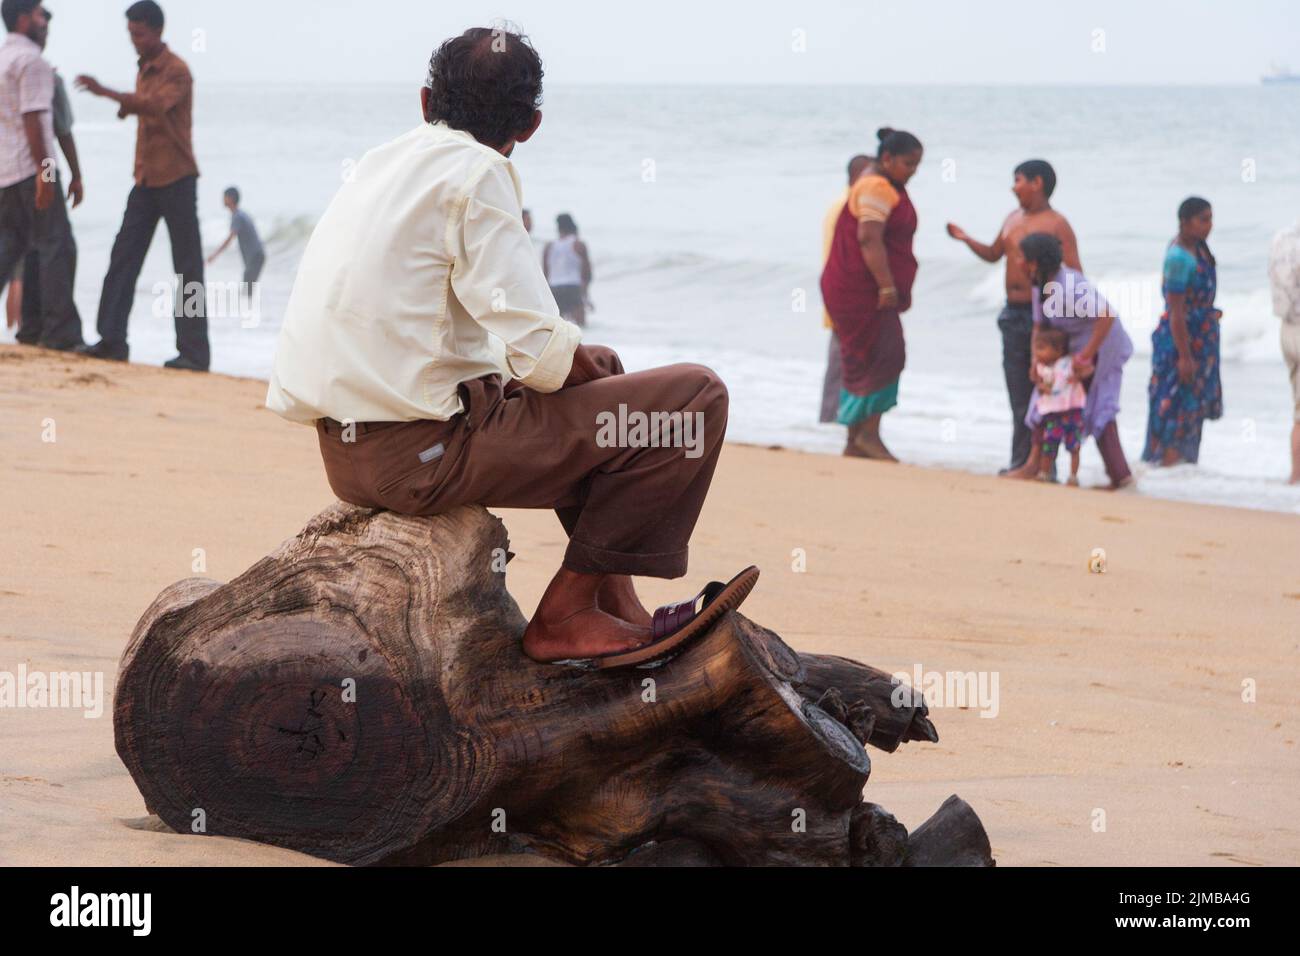 A man sitting on a tree stump gazes towards the rough sea as other people enjoy themselves at Marina Beach in Chennai. Stock Photo